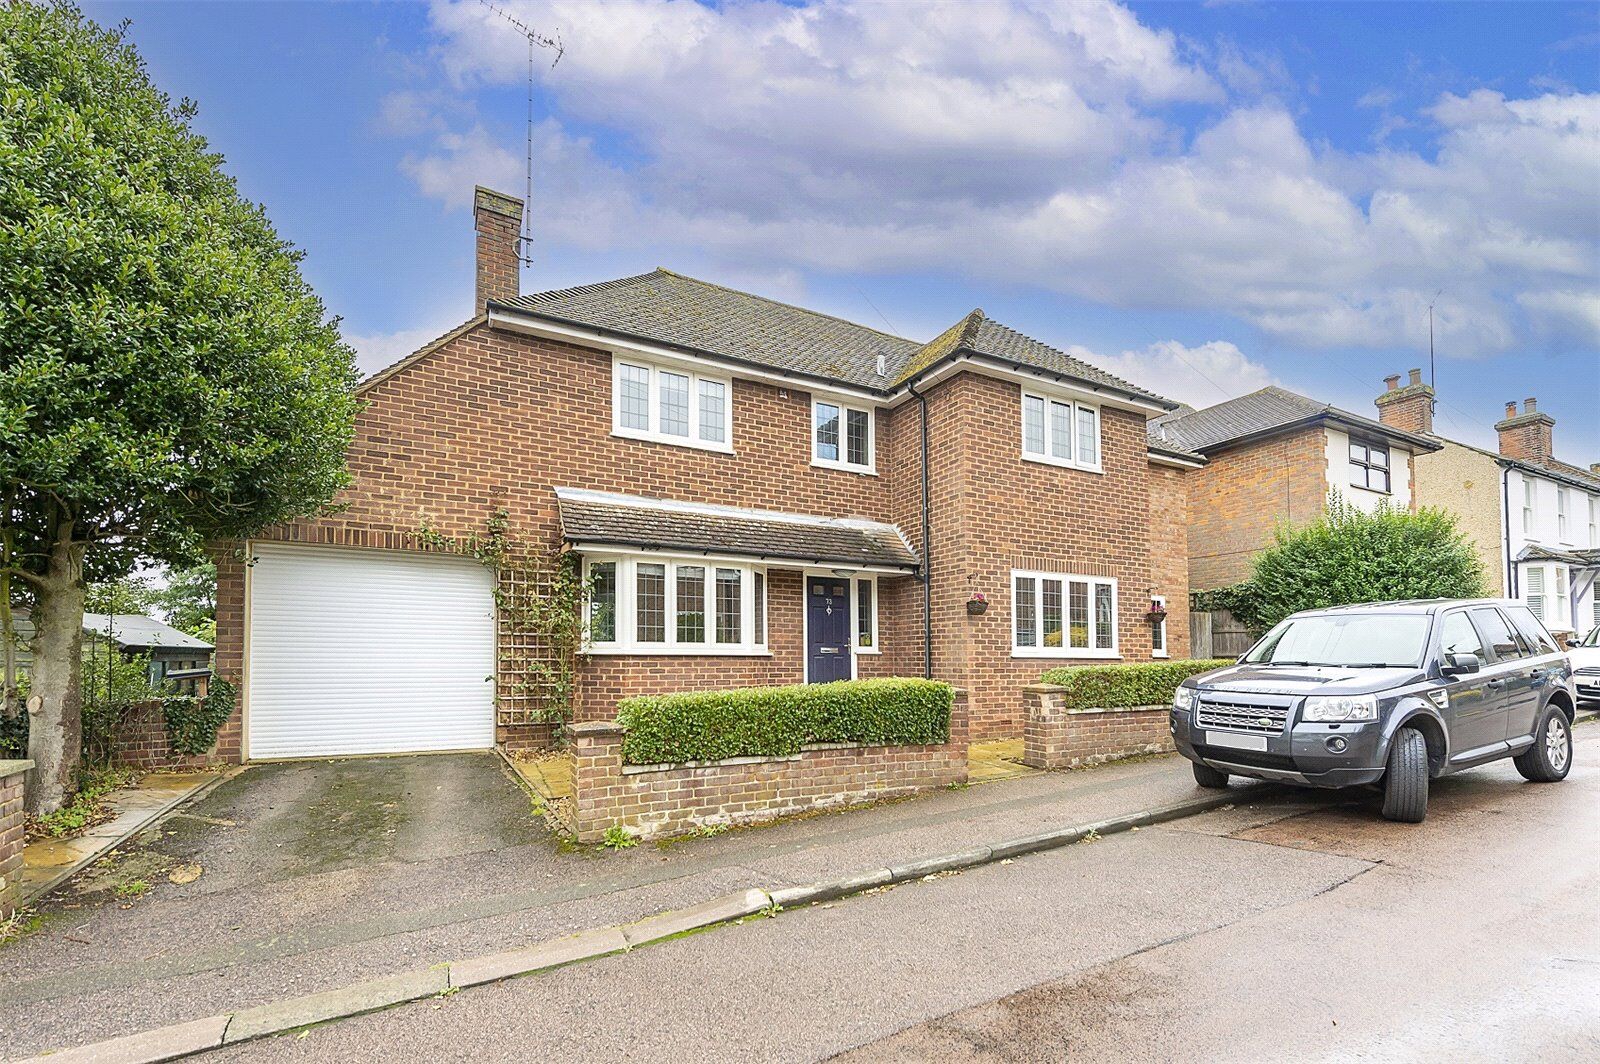 4 bedroom detached house for sale Necton Road, Wheathampstead, AL4, main image